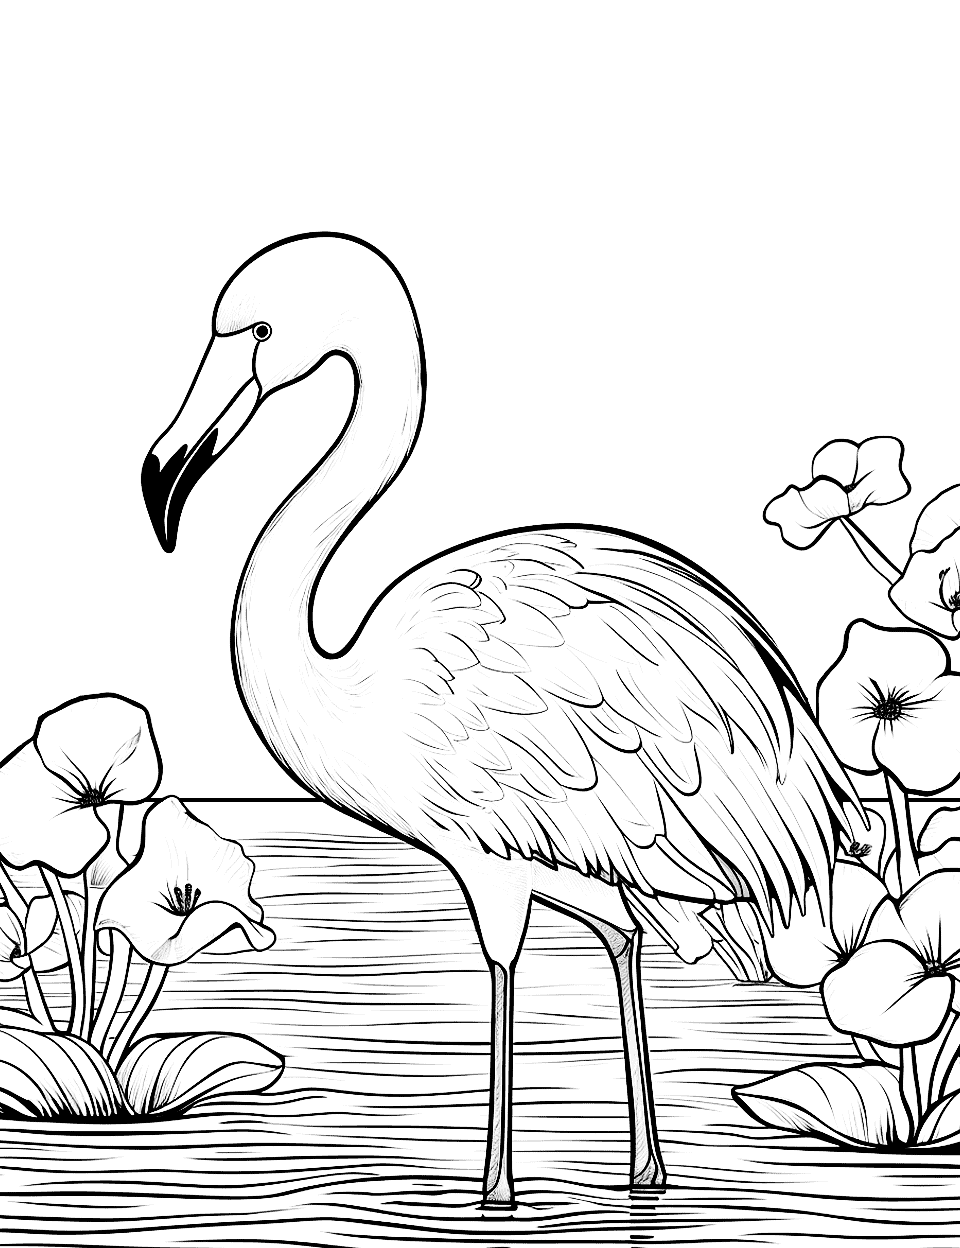 Flamingo and the Giant Flower Coloring Page - A beautiful scene of a flamingo standing next to a pond with giant flowers in water.